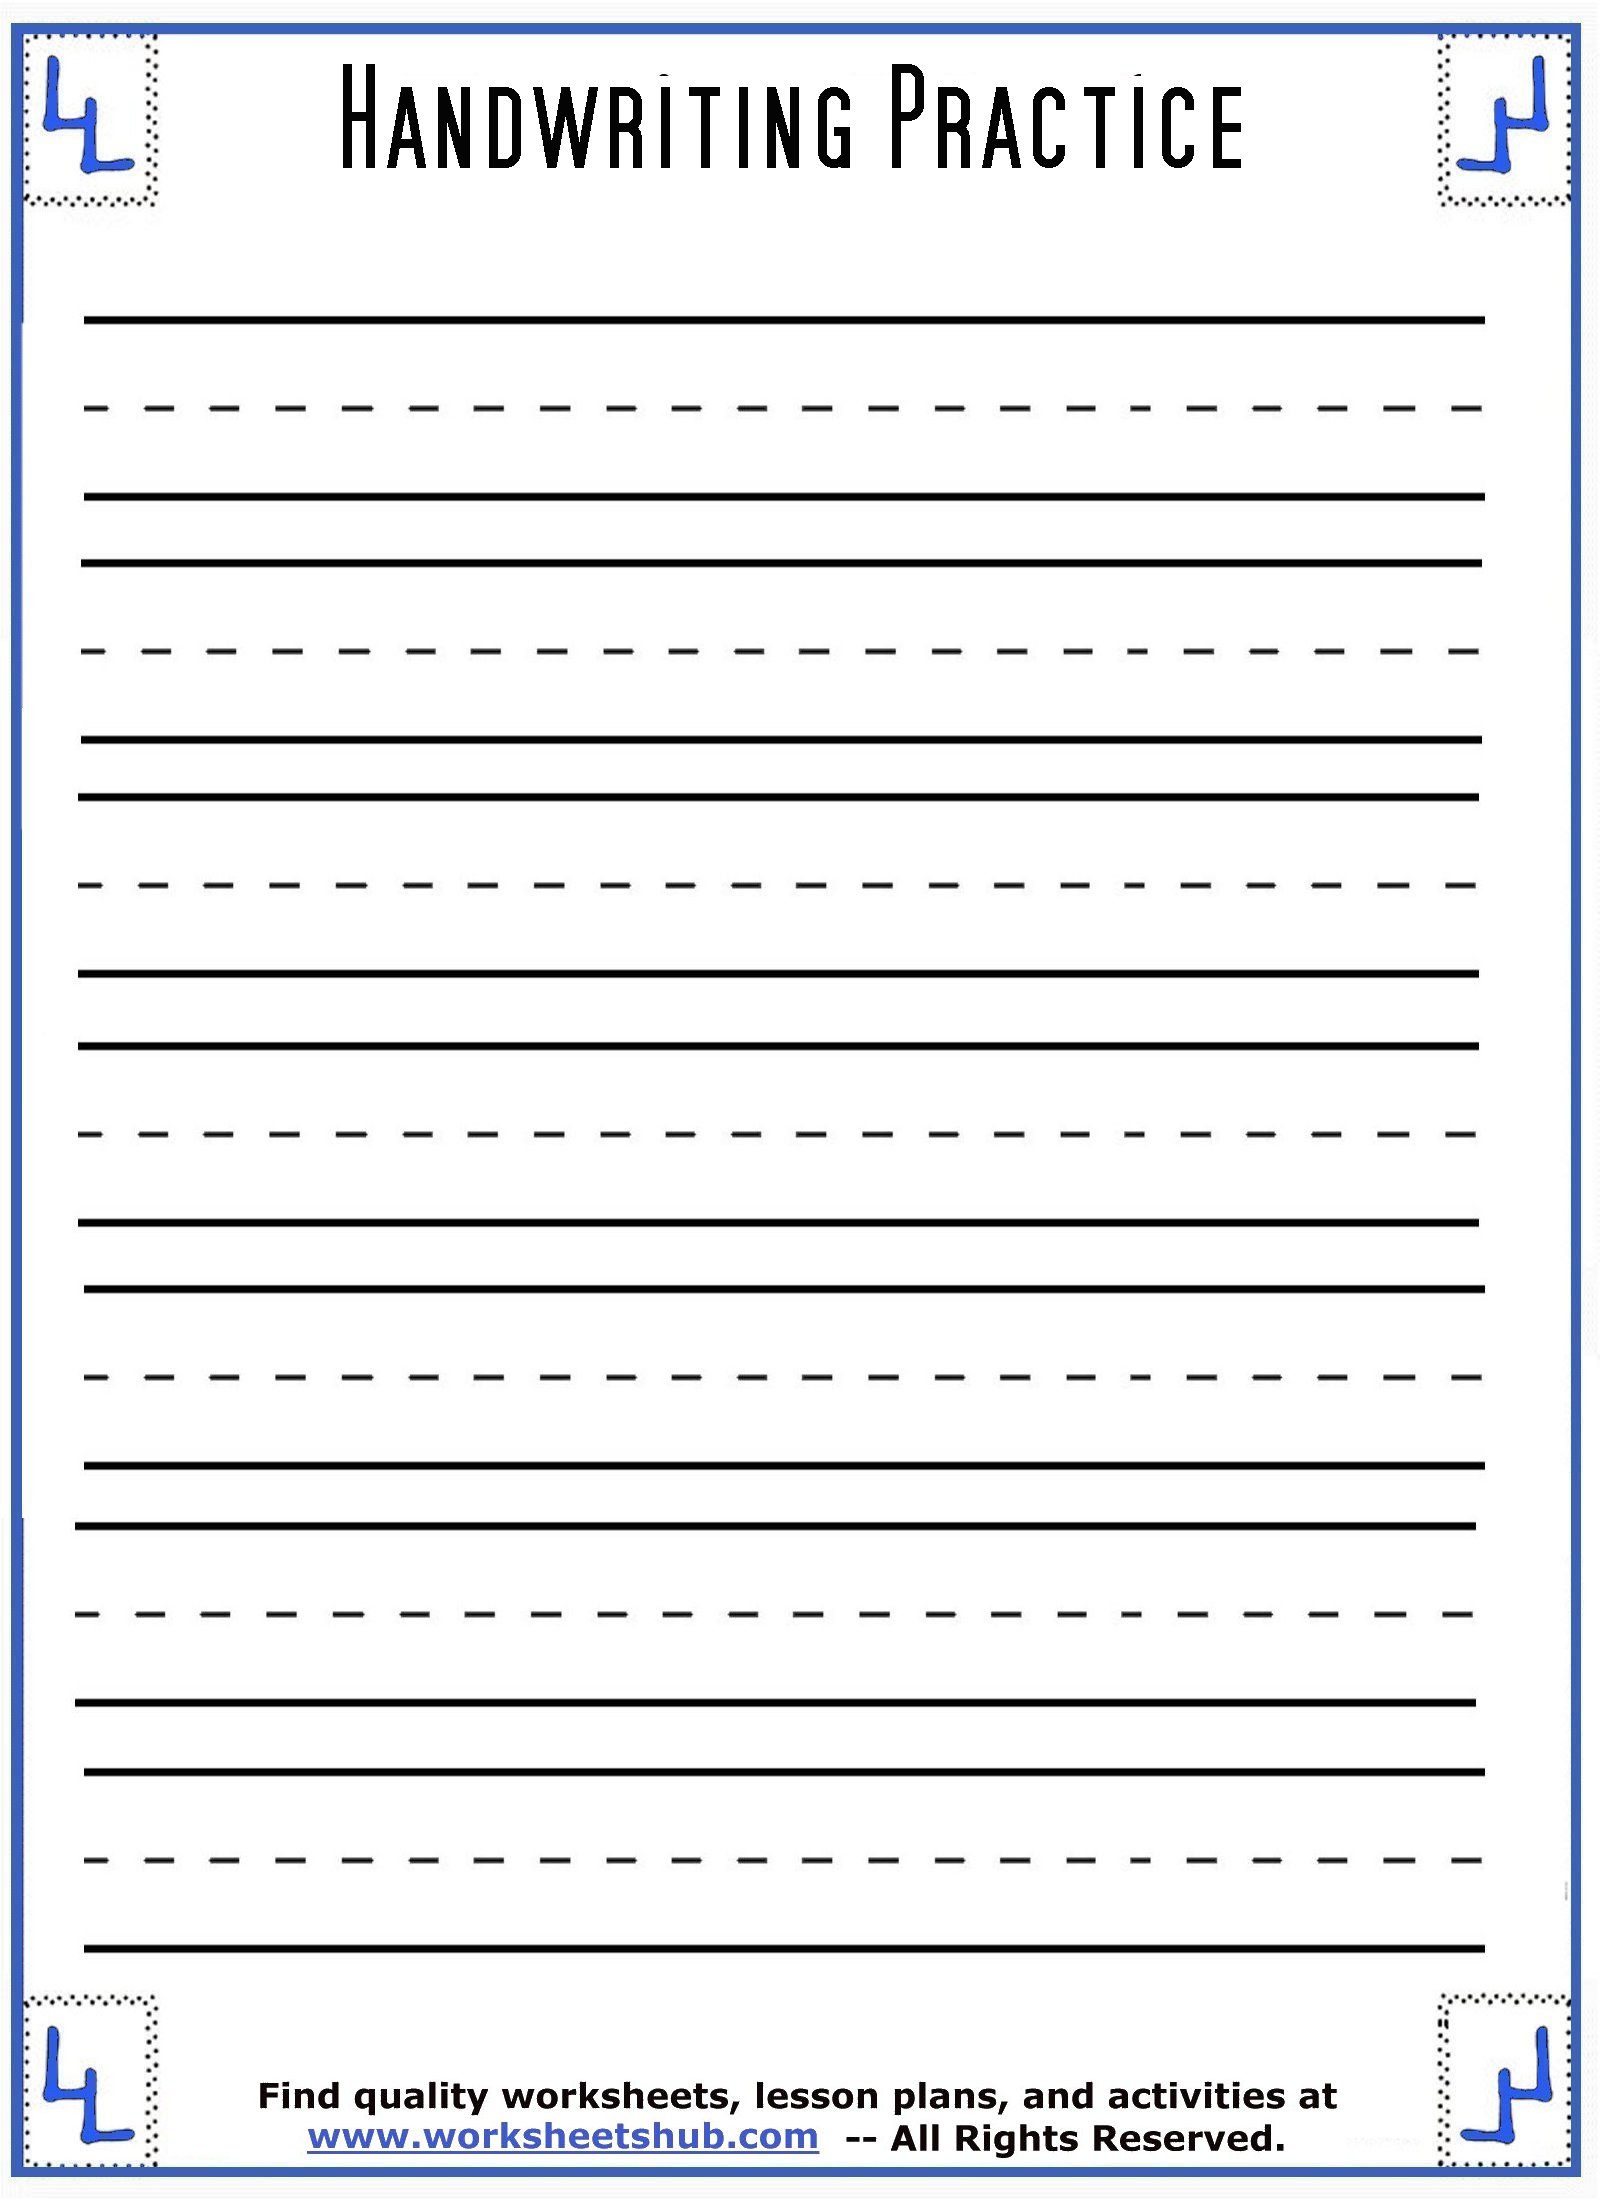 handwriting-sheets-printable-3-lined-paper